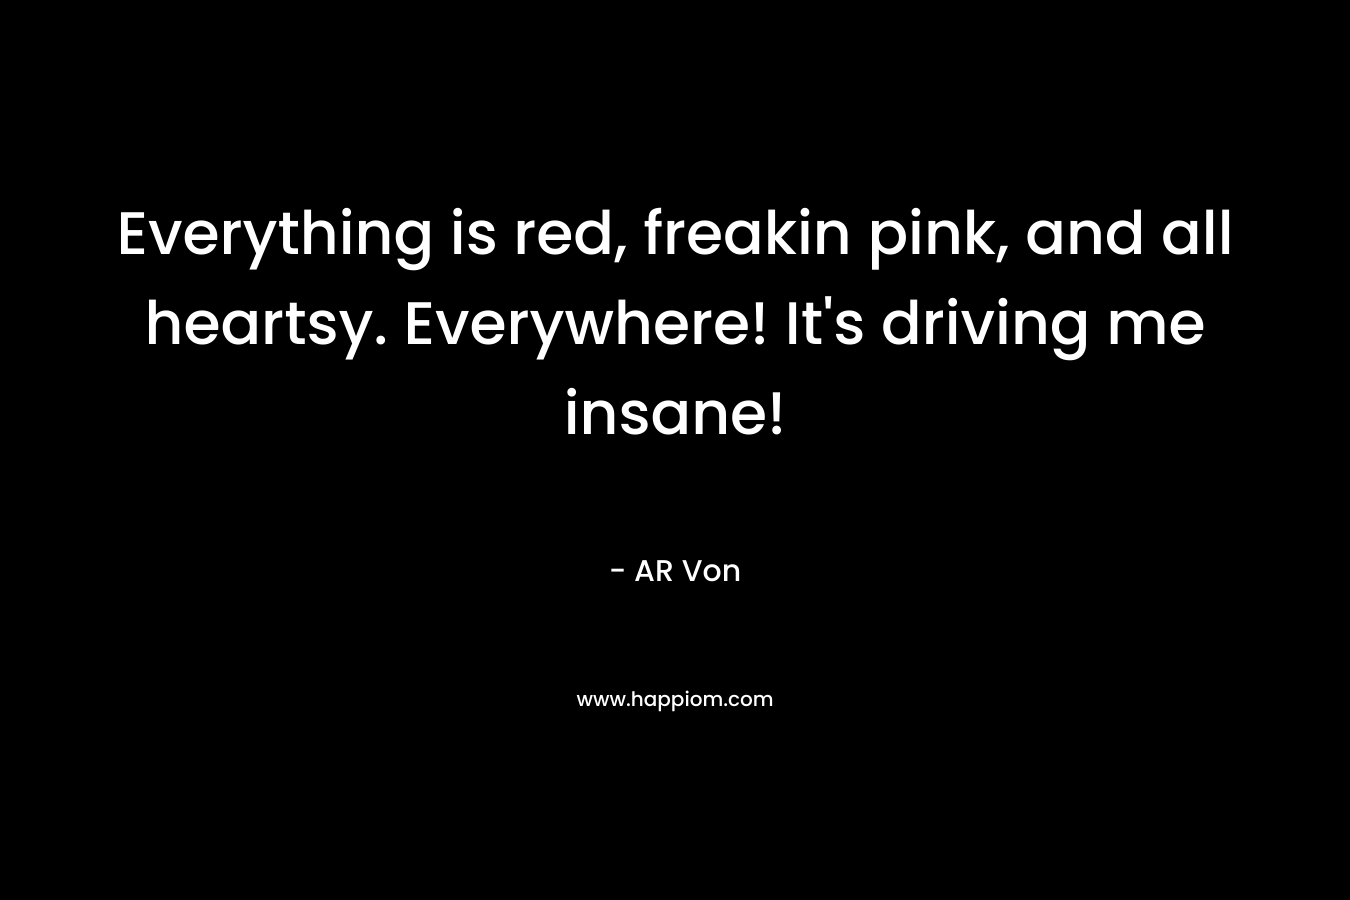 Everything is red, freakin pink, and all heartsy. Everywhere! It’s driving me insane! – AR Von